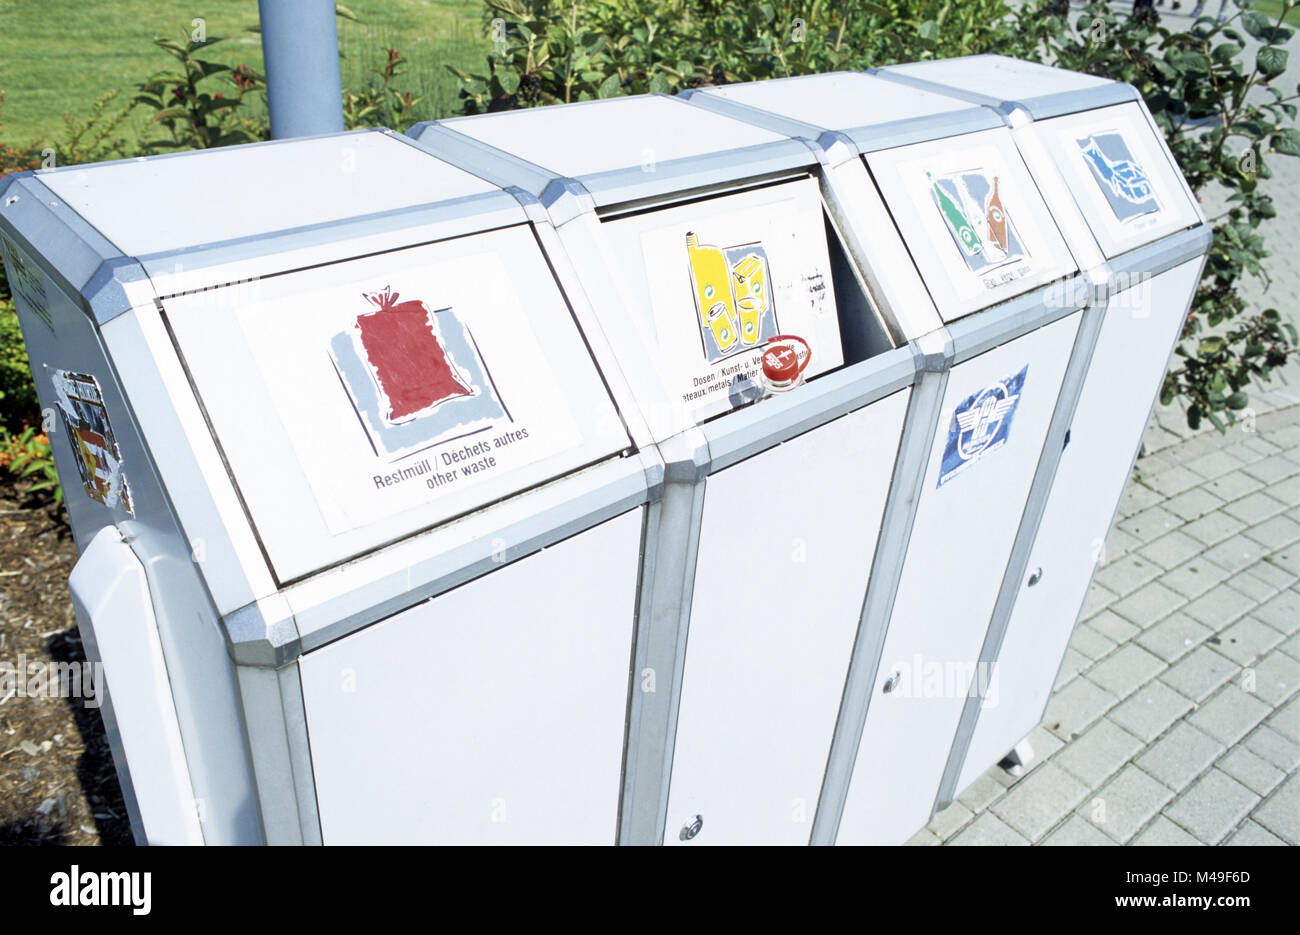 Segregated recycling bins at an Autobahn service station in German Stock Photo